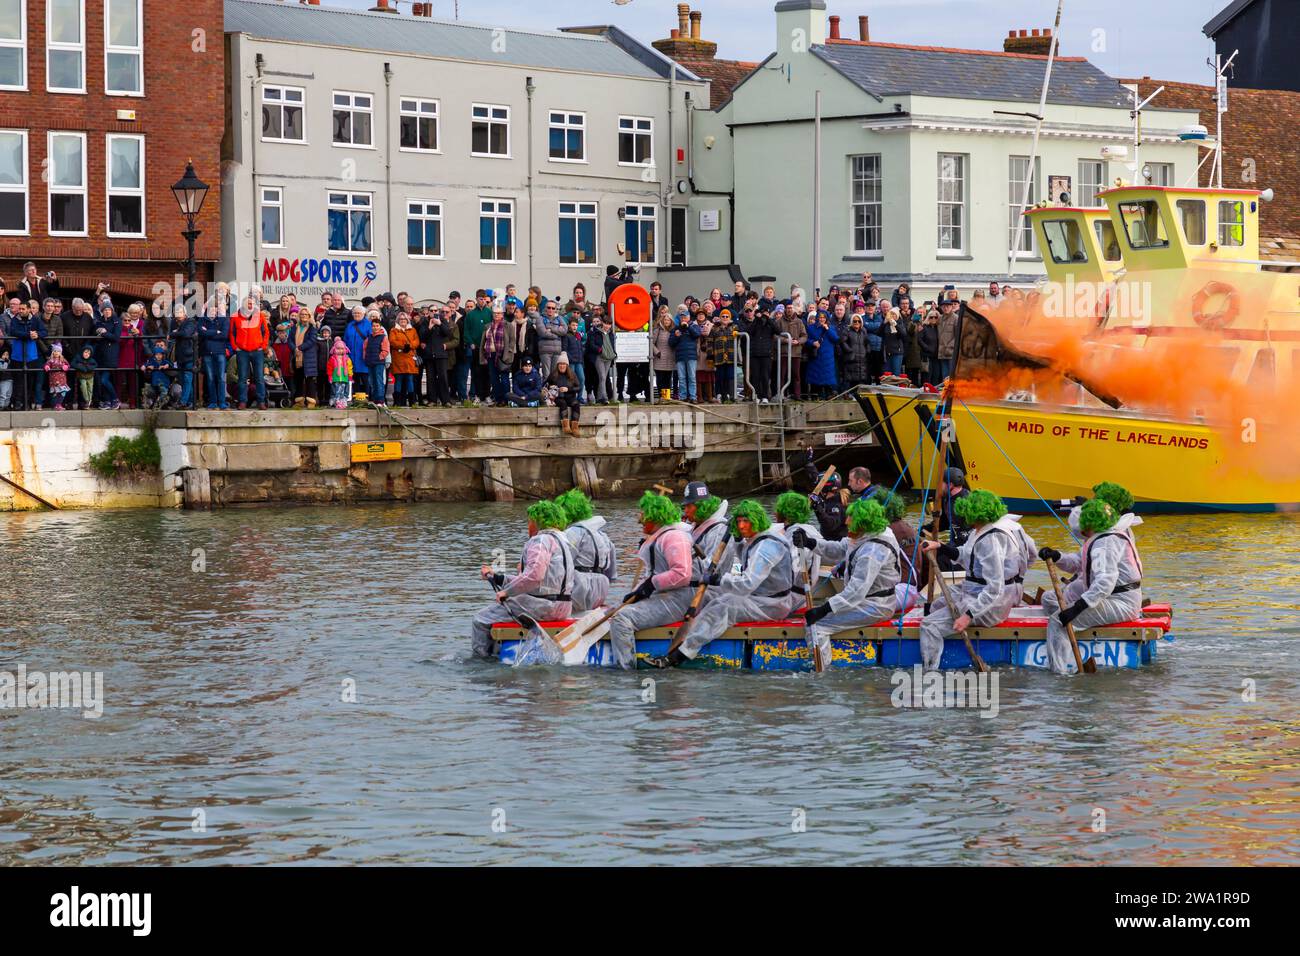 Poole, Dorset, UK. 1st January, 2024. The New Years Day Bath Tub Race takes place with plenty of thrill, spills and sabotage! Thousands turn out to watch the event, as a variety of unusual home made crafts take to the water to race, with participants having fun, throwing eggs and flour and capsizing competing craft. A feel good start to the New Year. Credit: Carolyn Jenkins/Alamy Live News Stock Photo